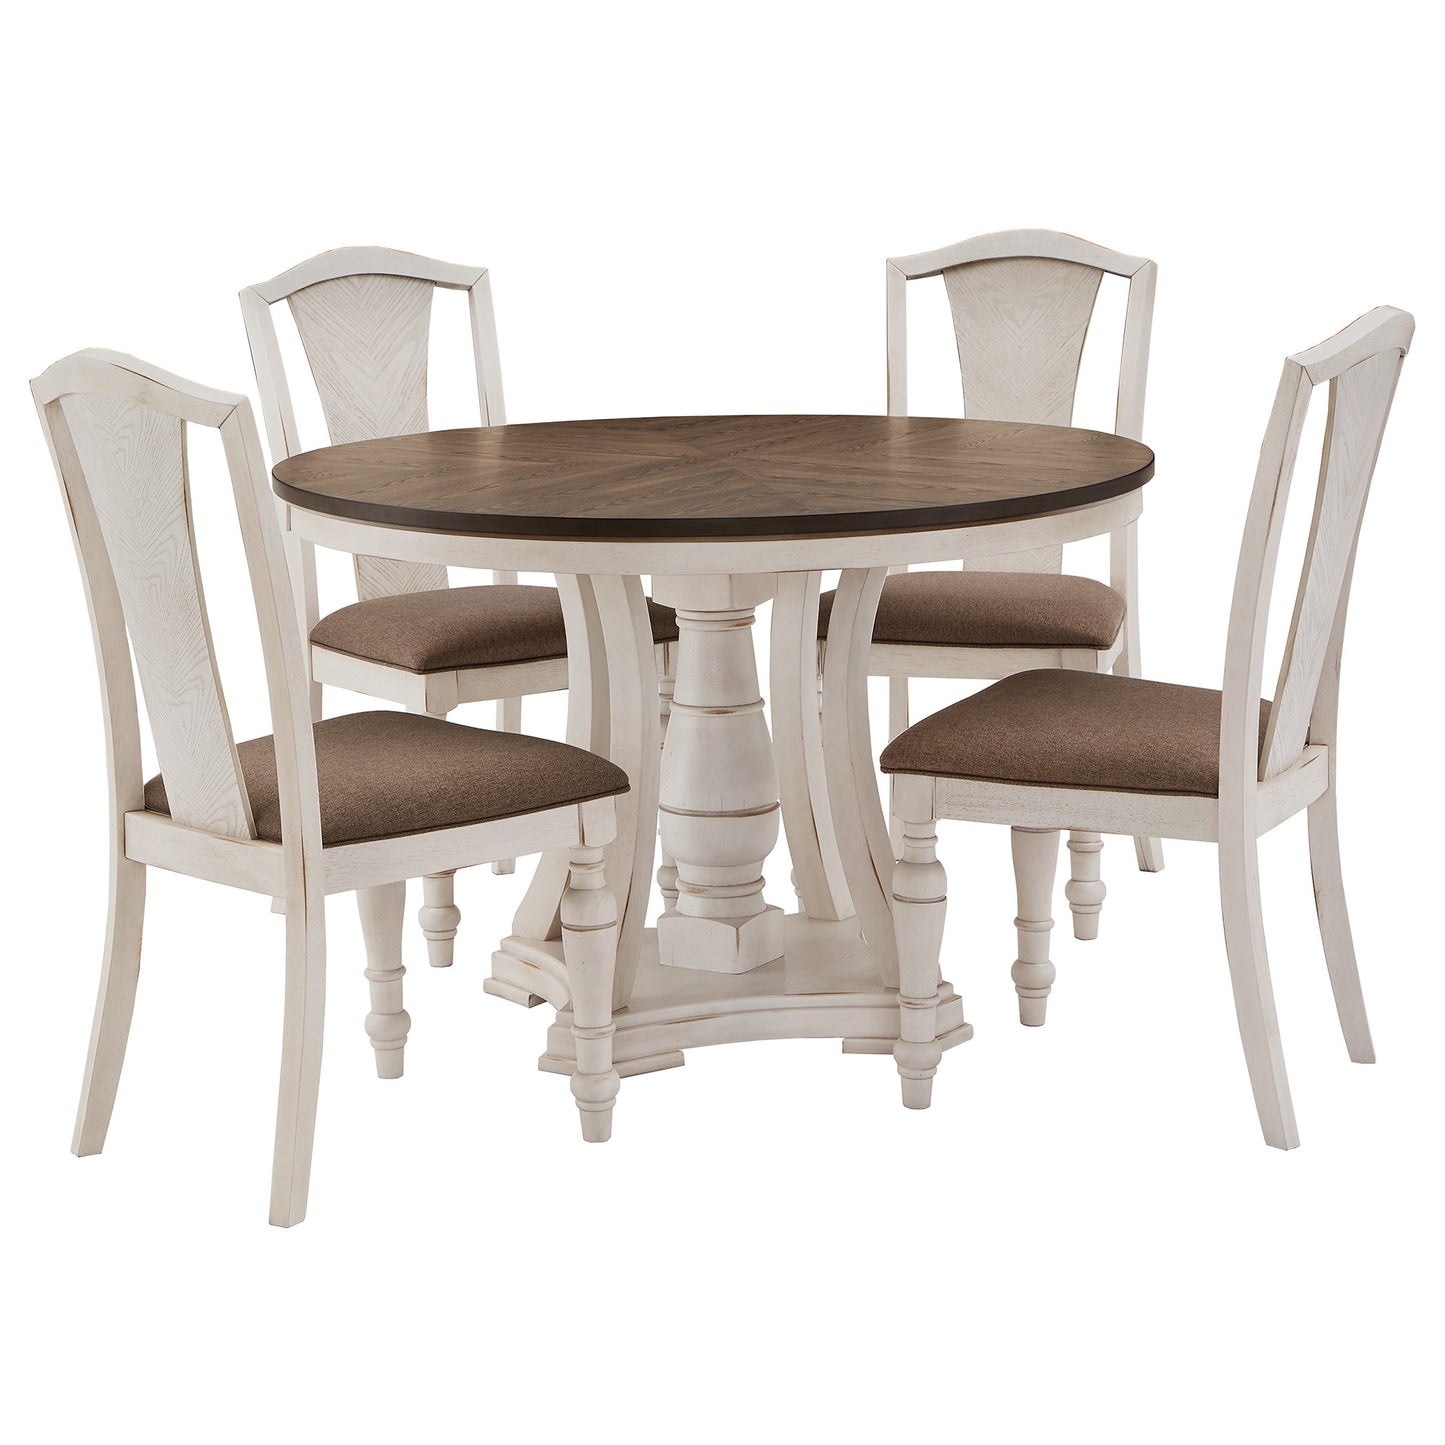 Dual-tone Solid Rubberwood Round Dining Table Set - 5-Piece